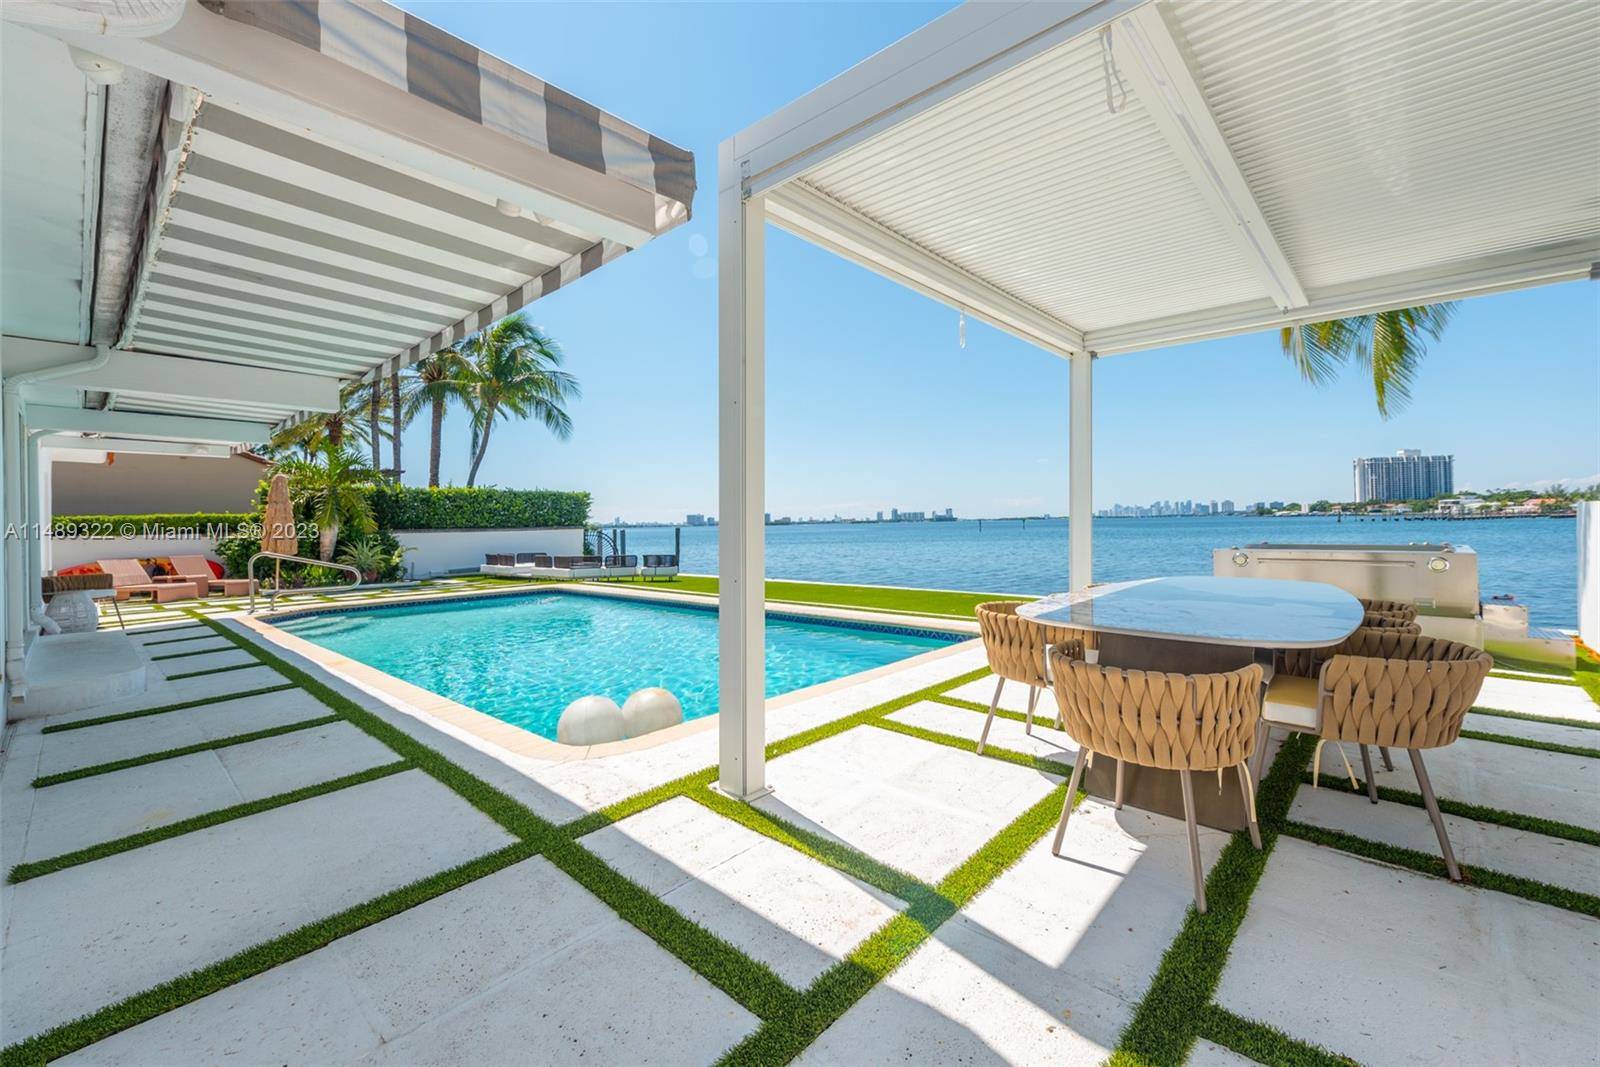 Elegantly appointed waterfront residence, exquisitely furnished with top tier décor and perfect for hosting gatherings.